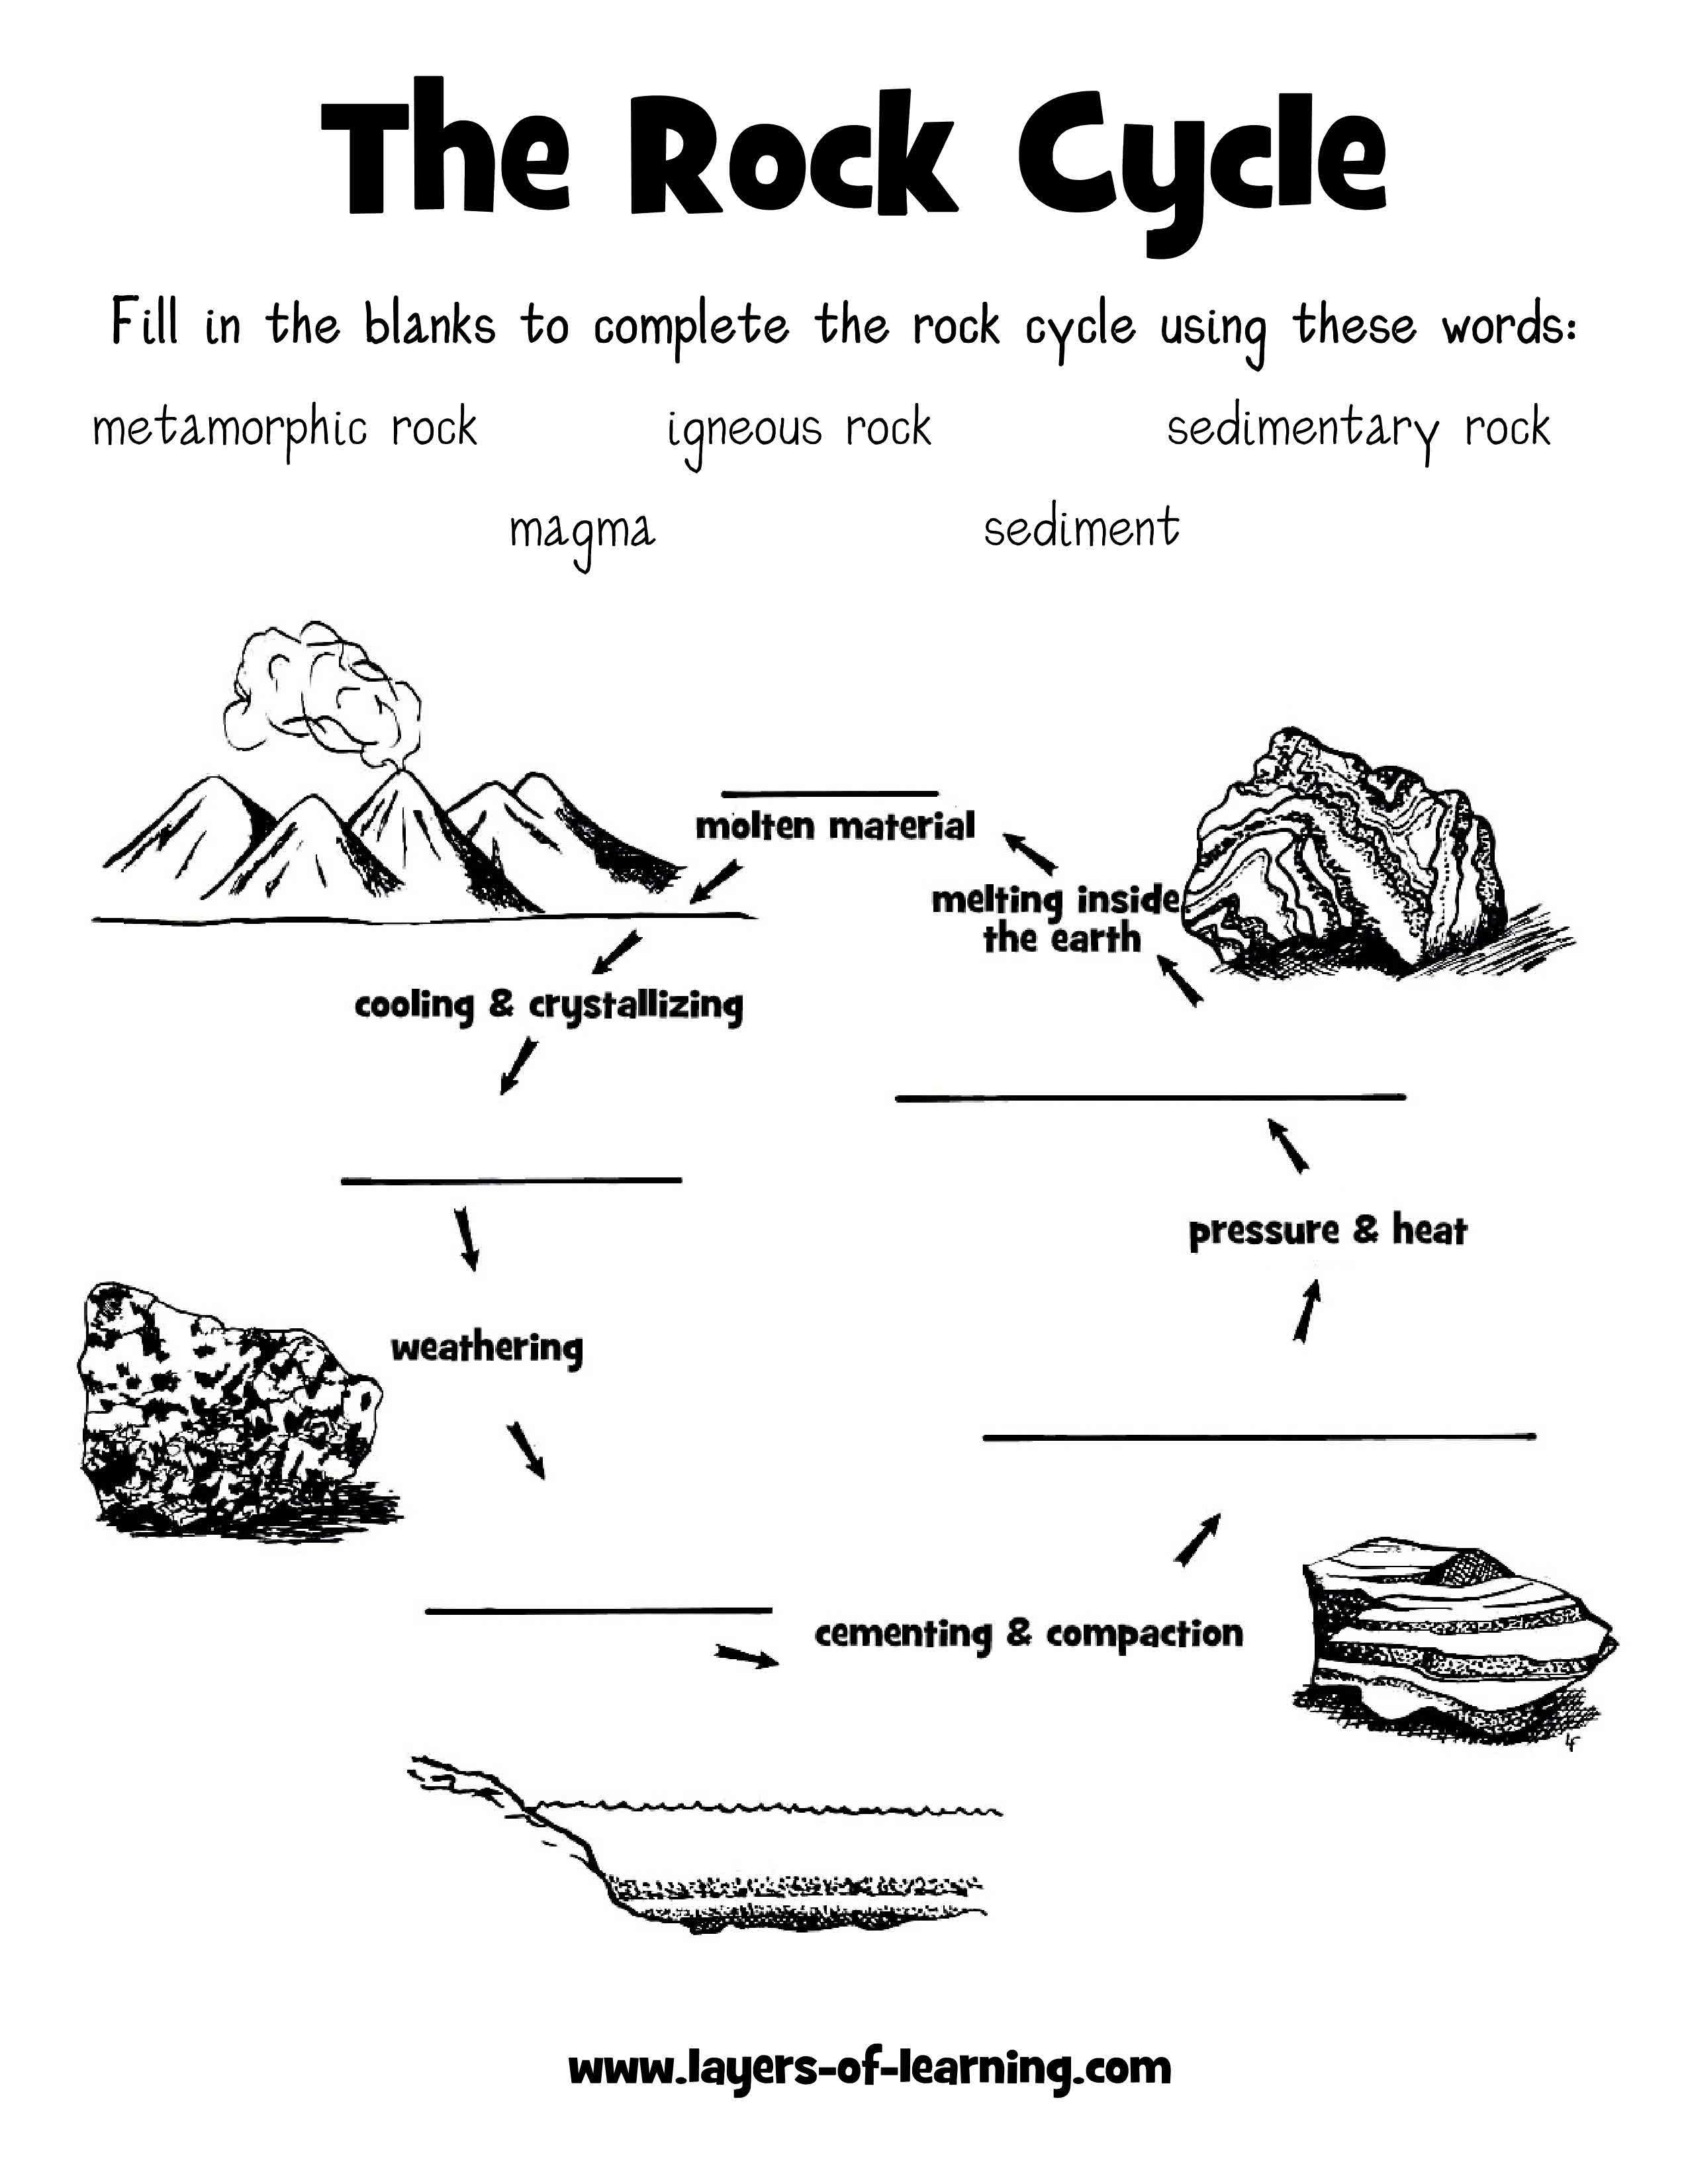 Rock Cycle Worksheet Geography Activities For Kids Worksheets Rock